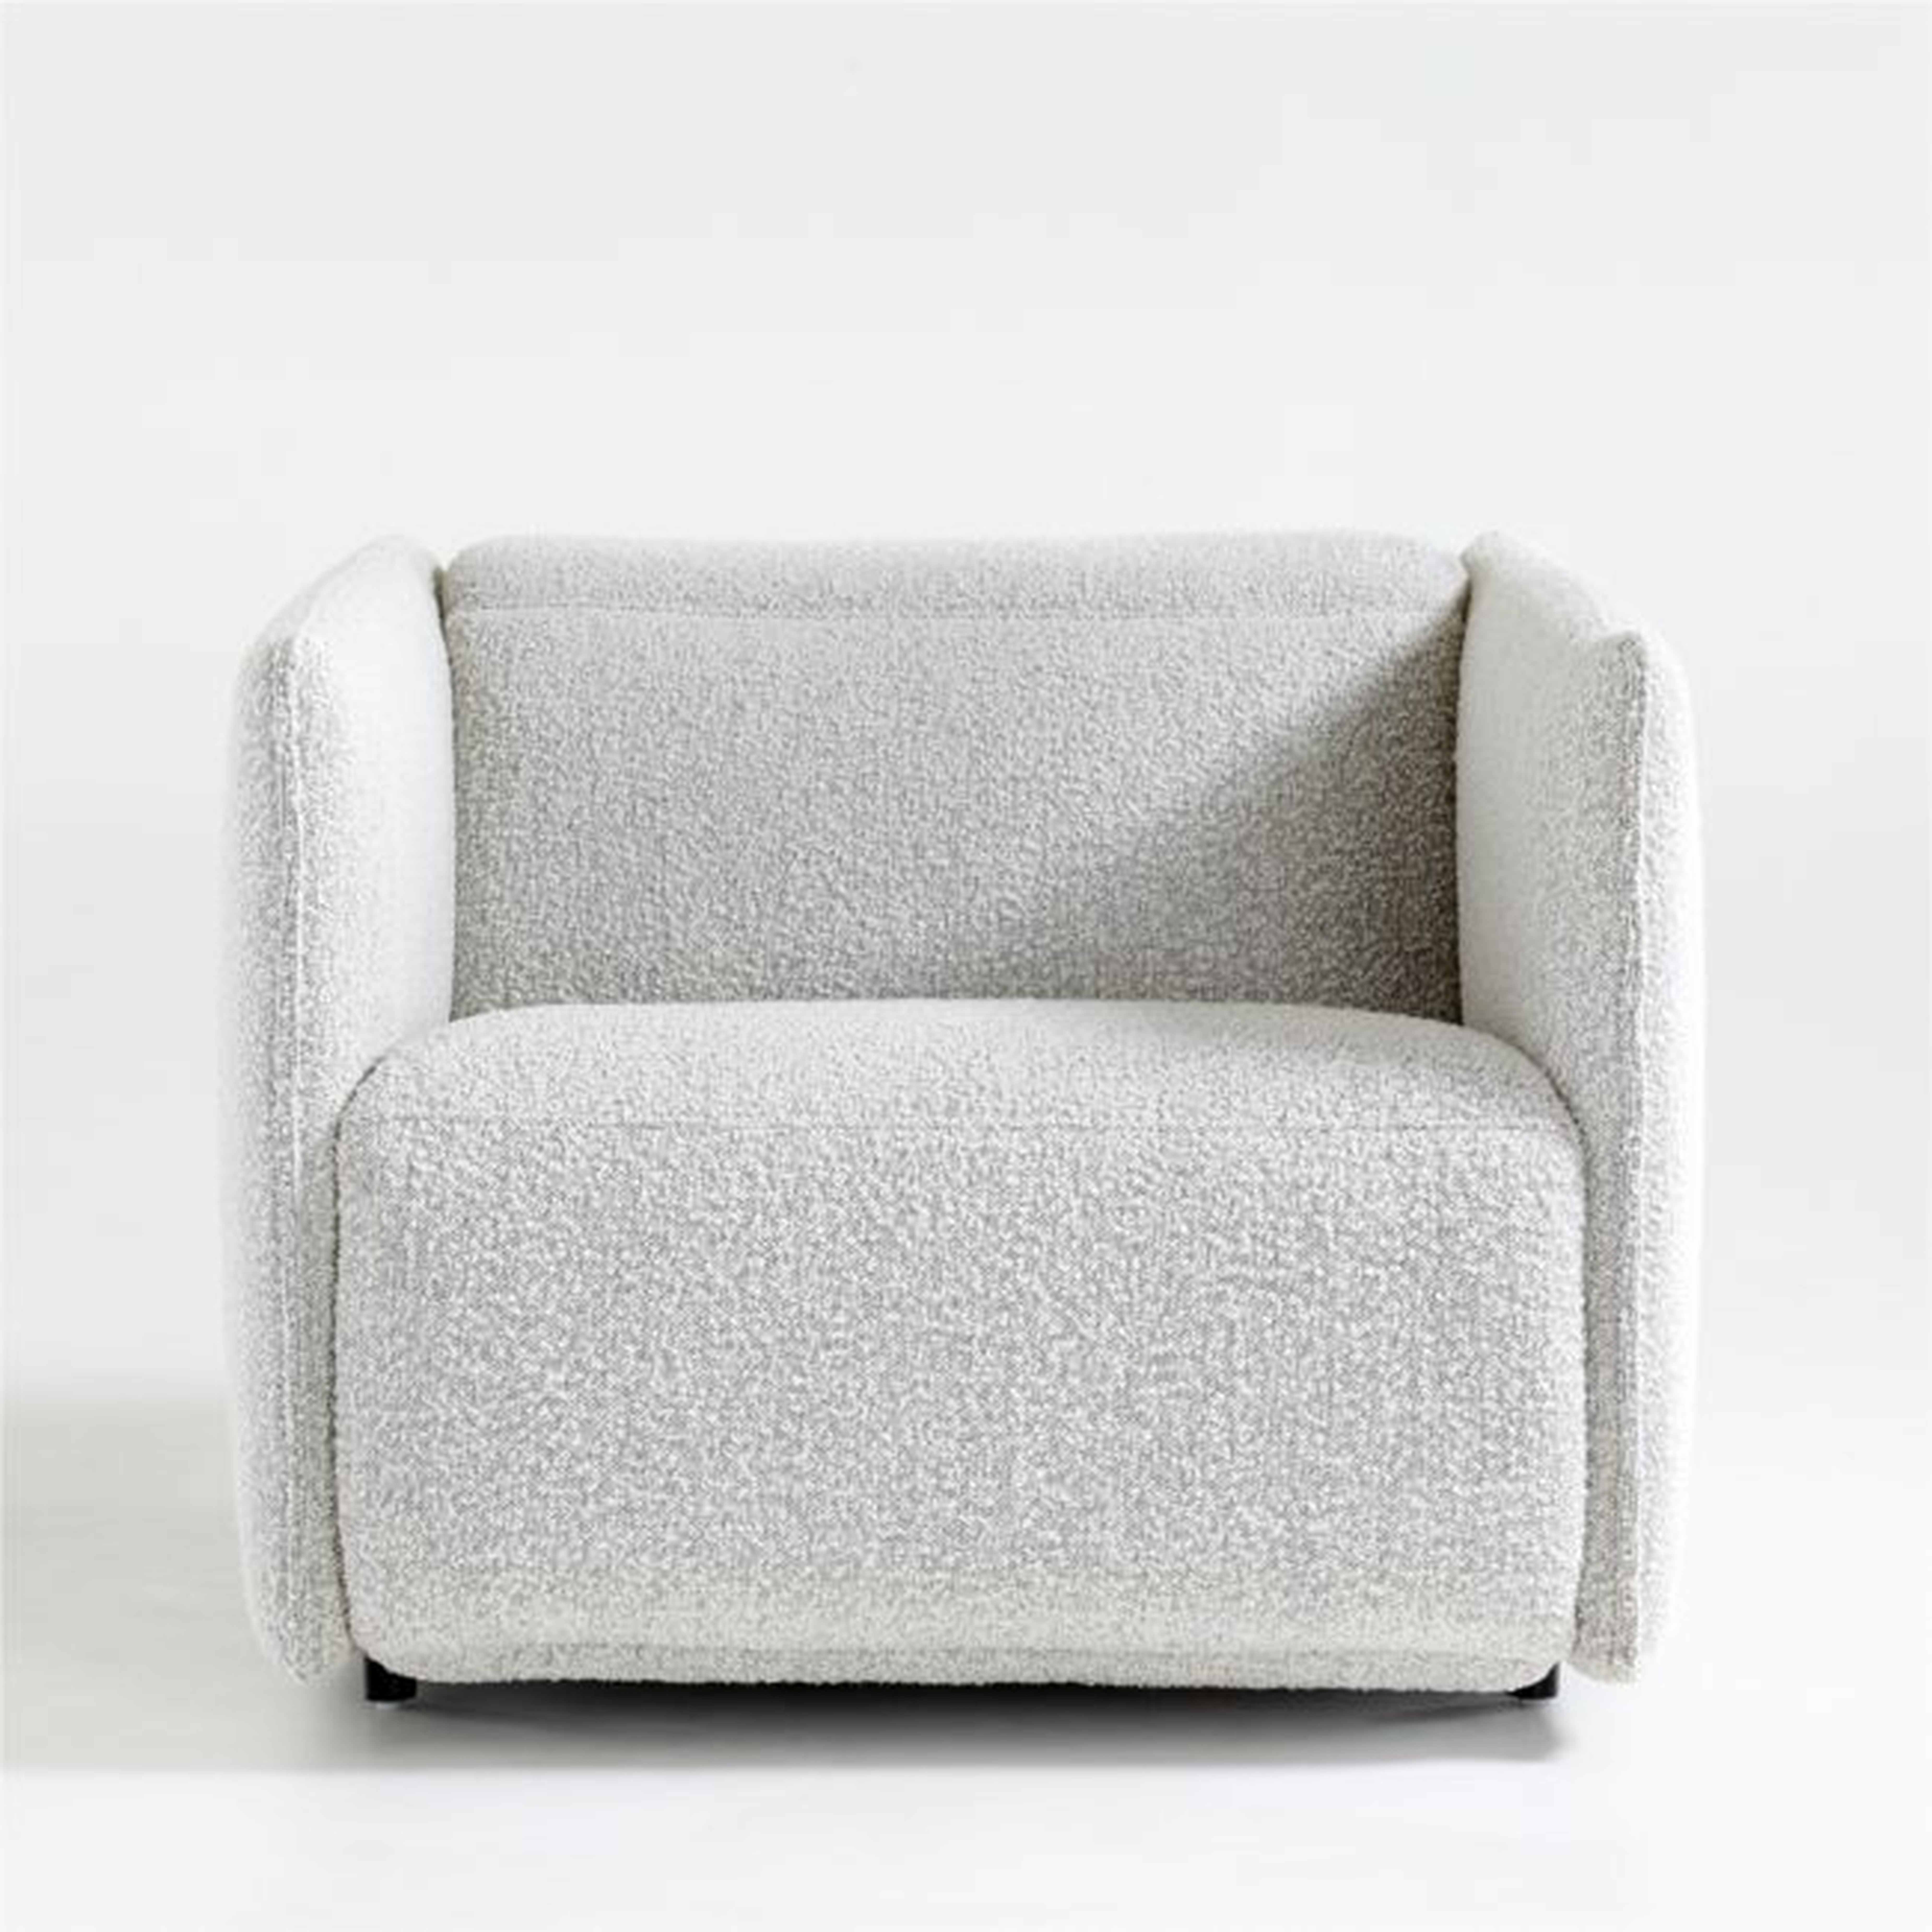 Leisure Power Recliner Chair - Crate and Barrel